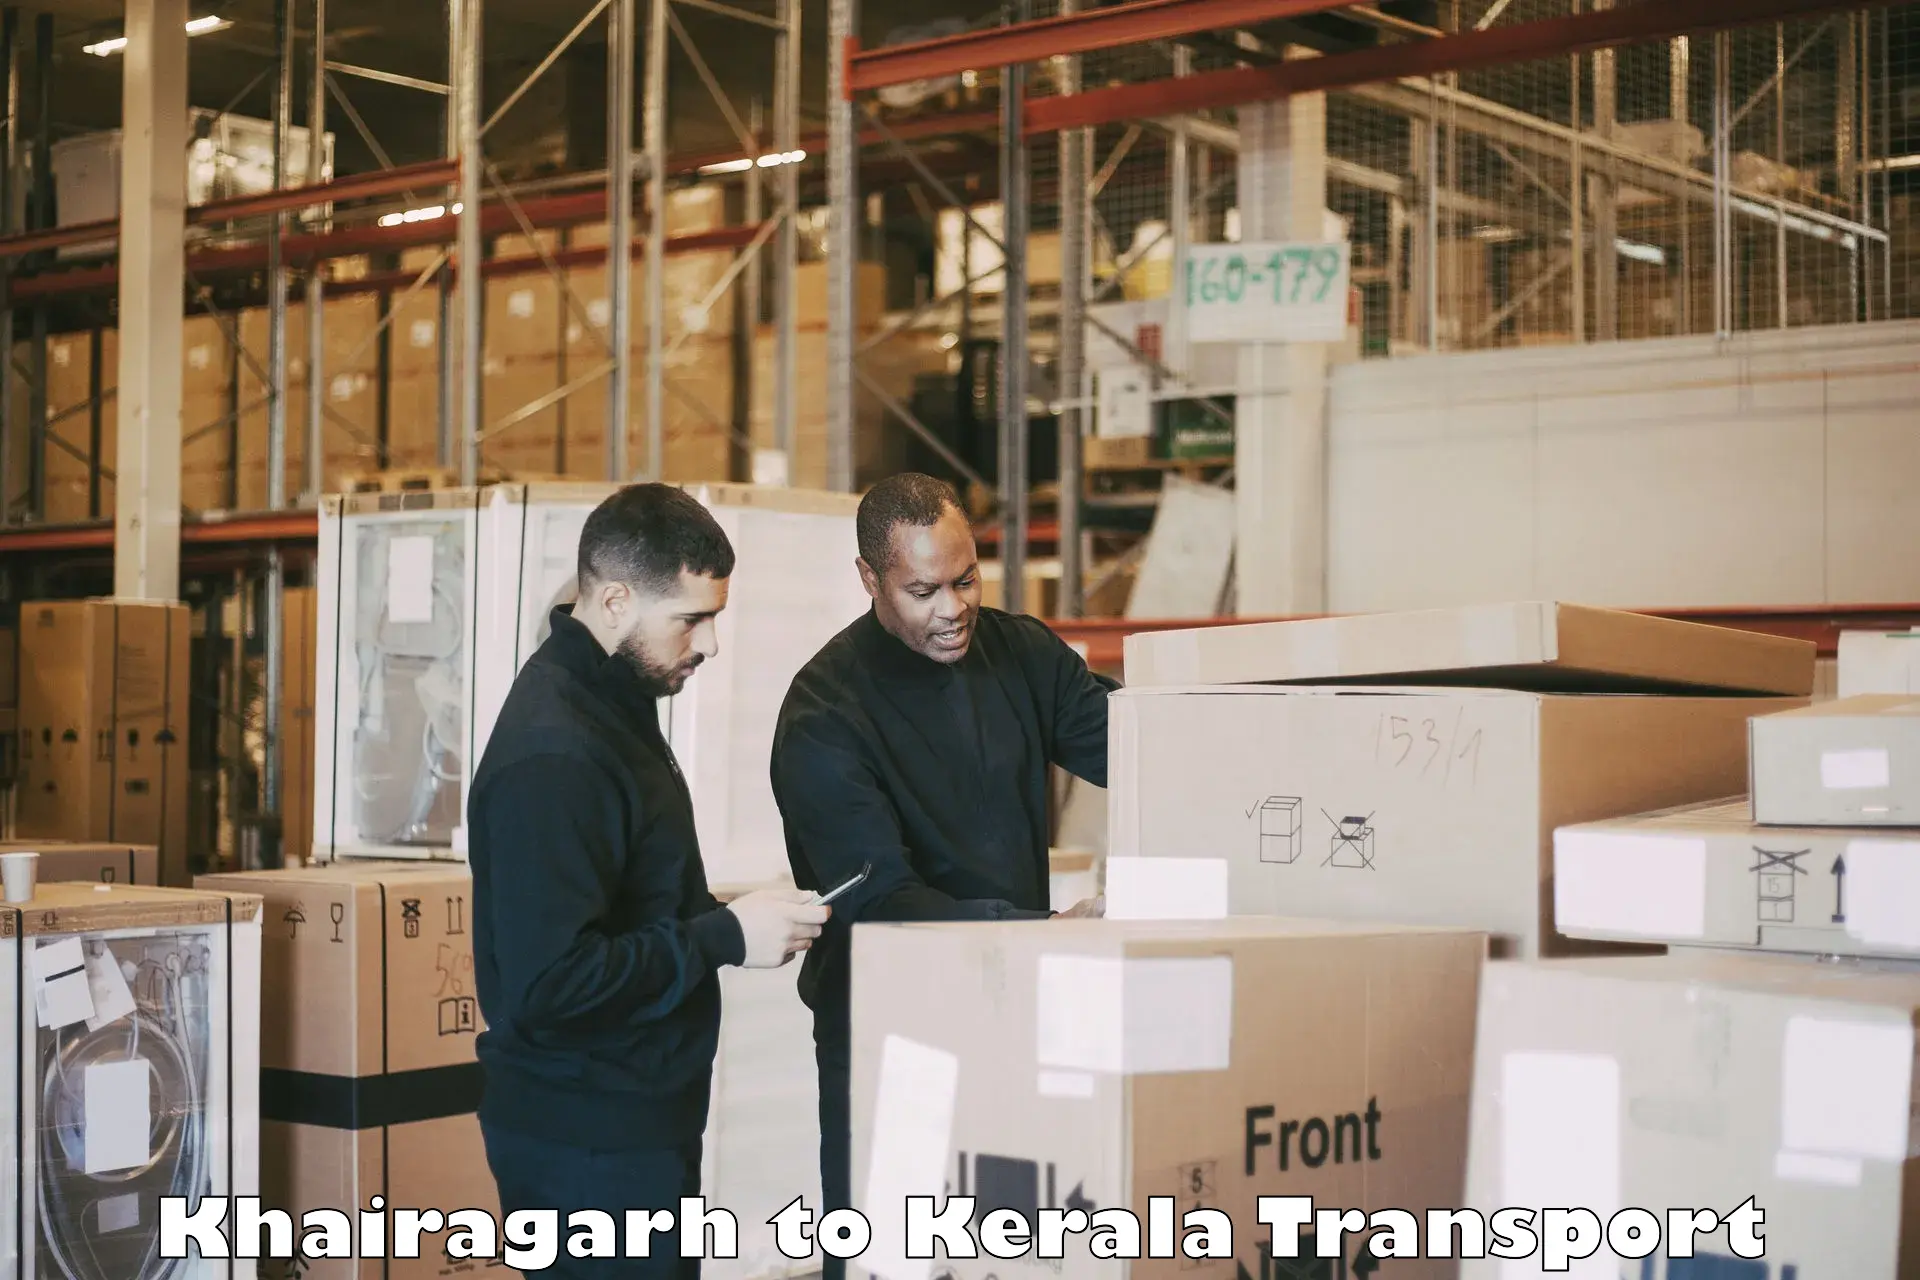 Air freight transport services Khairagarh to Cochin University of Science and Technology